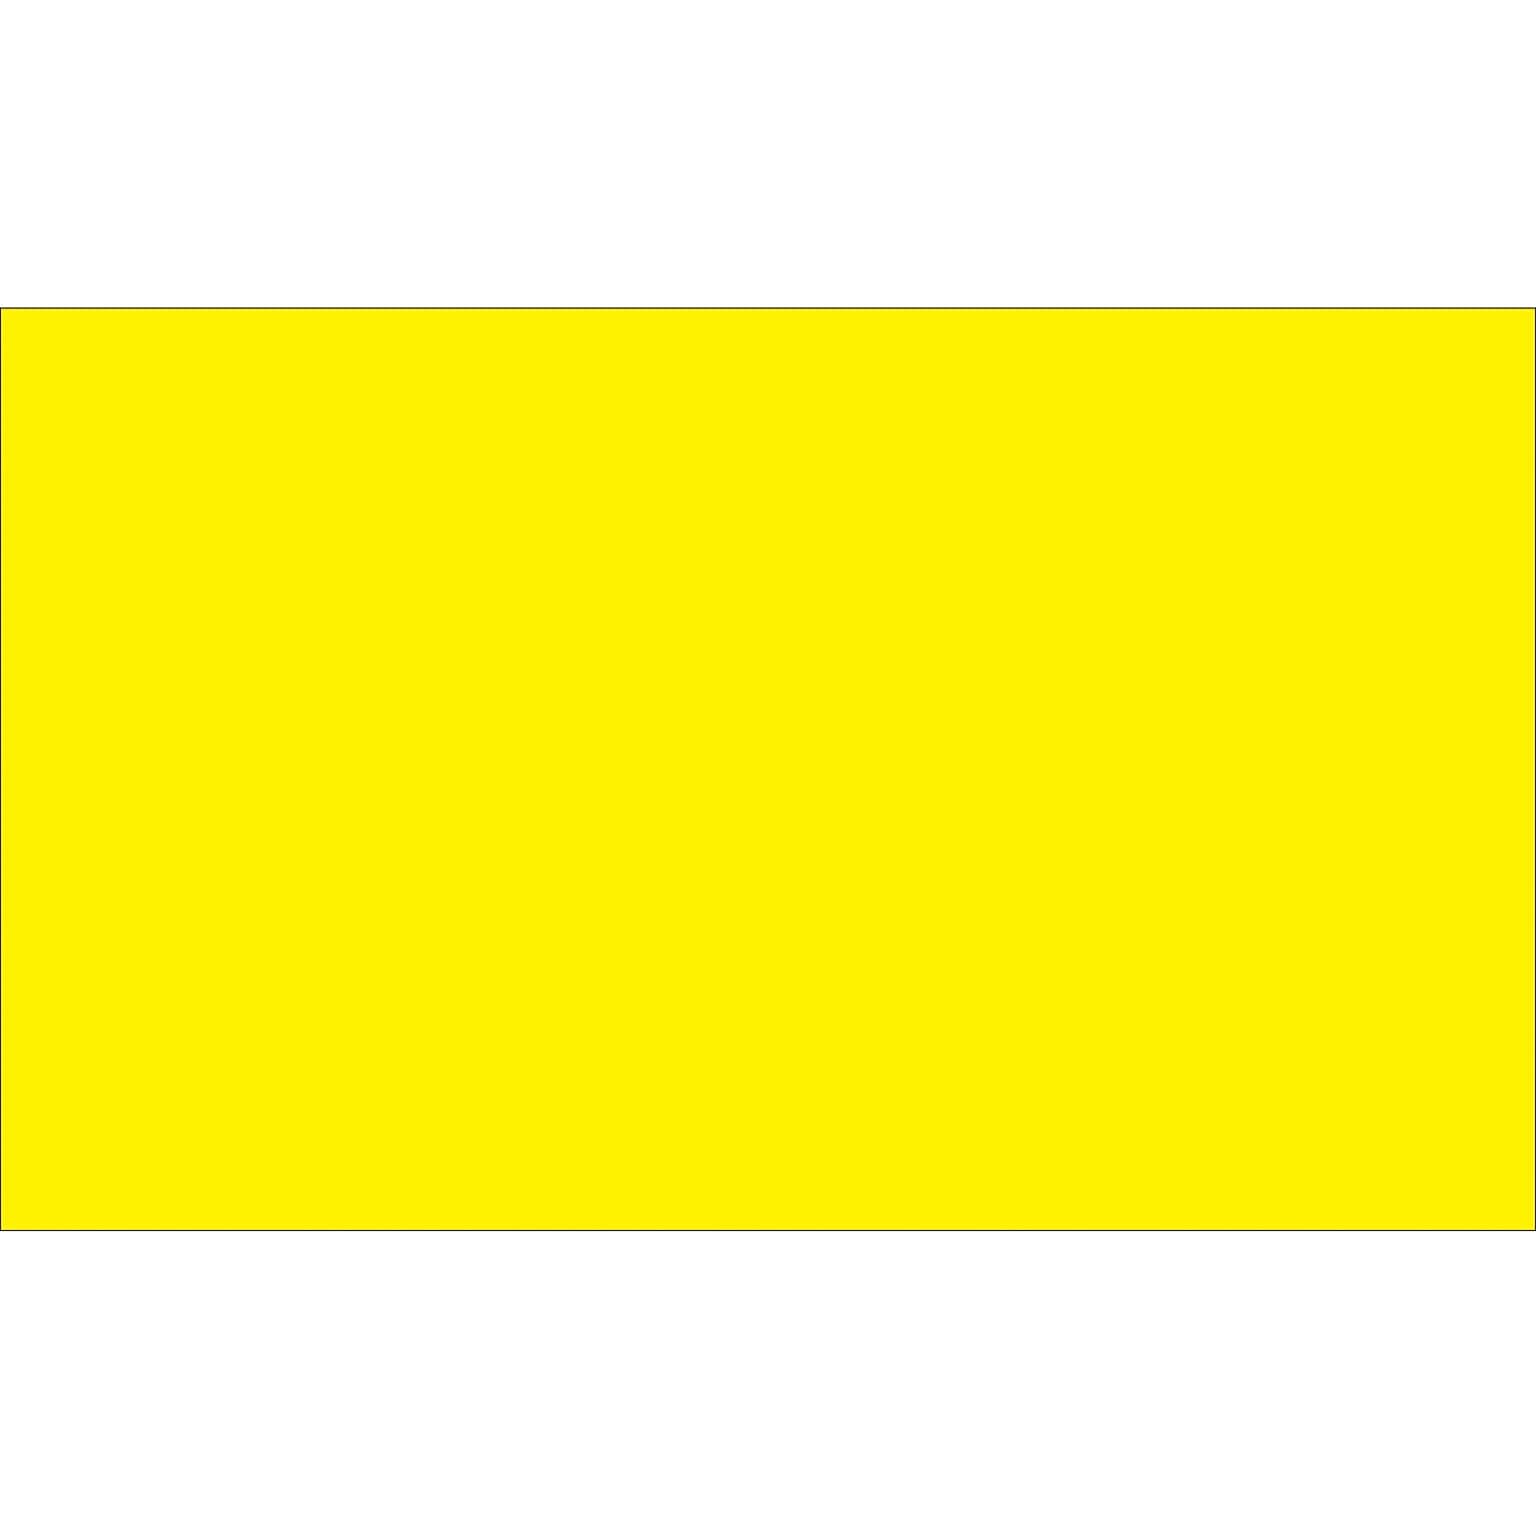 Tape Logic 6 x 4 Rectangle Inventory Label, Fluorescent Yellow, 500/Roll